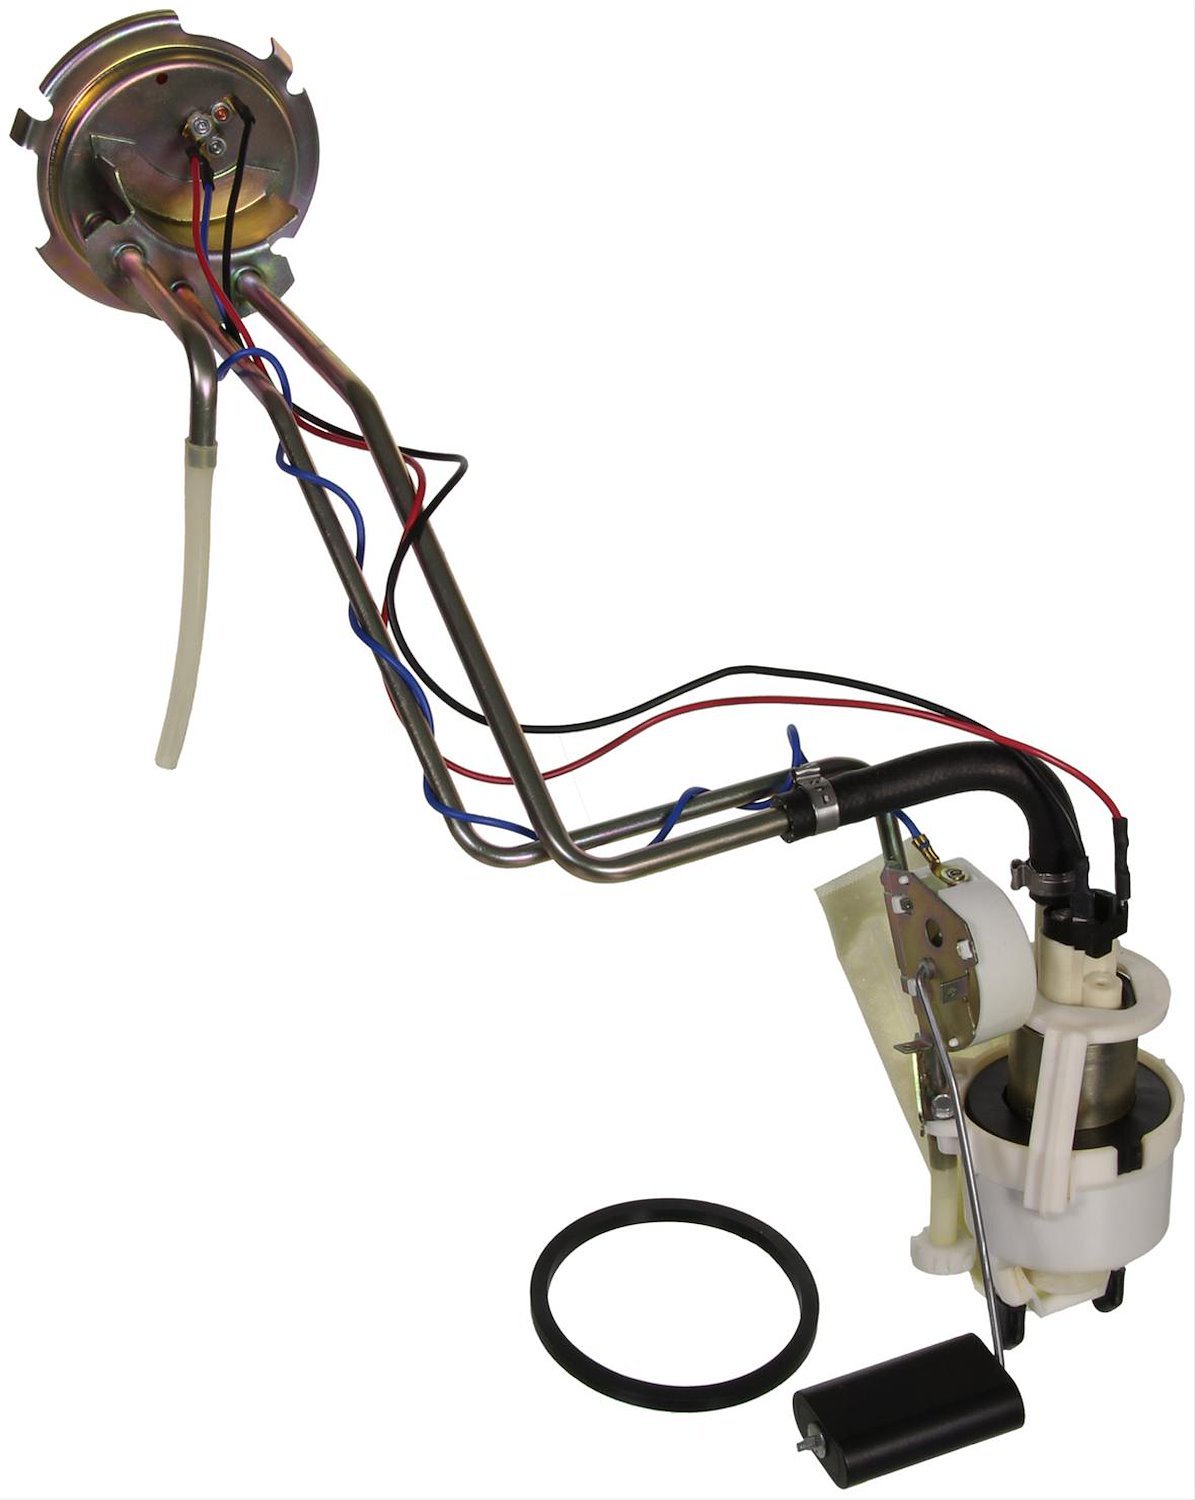 Replacement Fuel Pump Hanger Assembly for 1988-1990 Dodge Omni/Plymouth Horizon